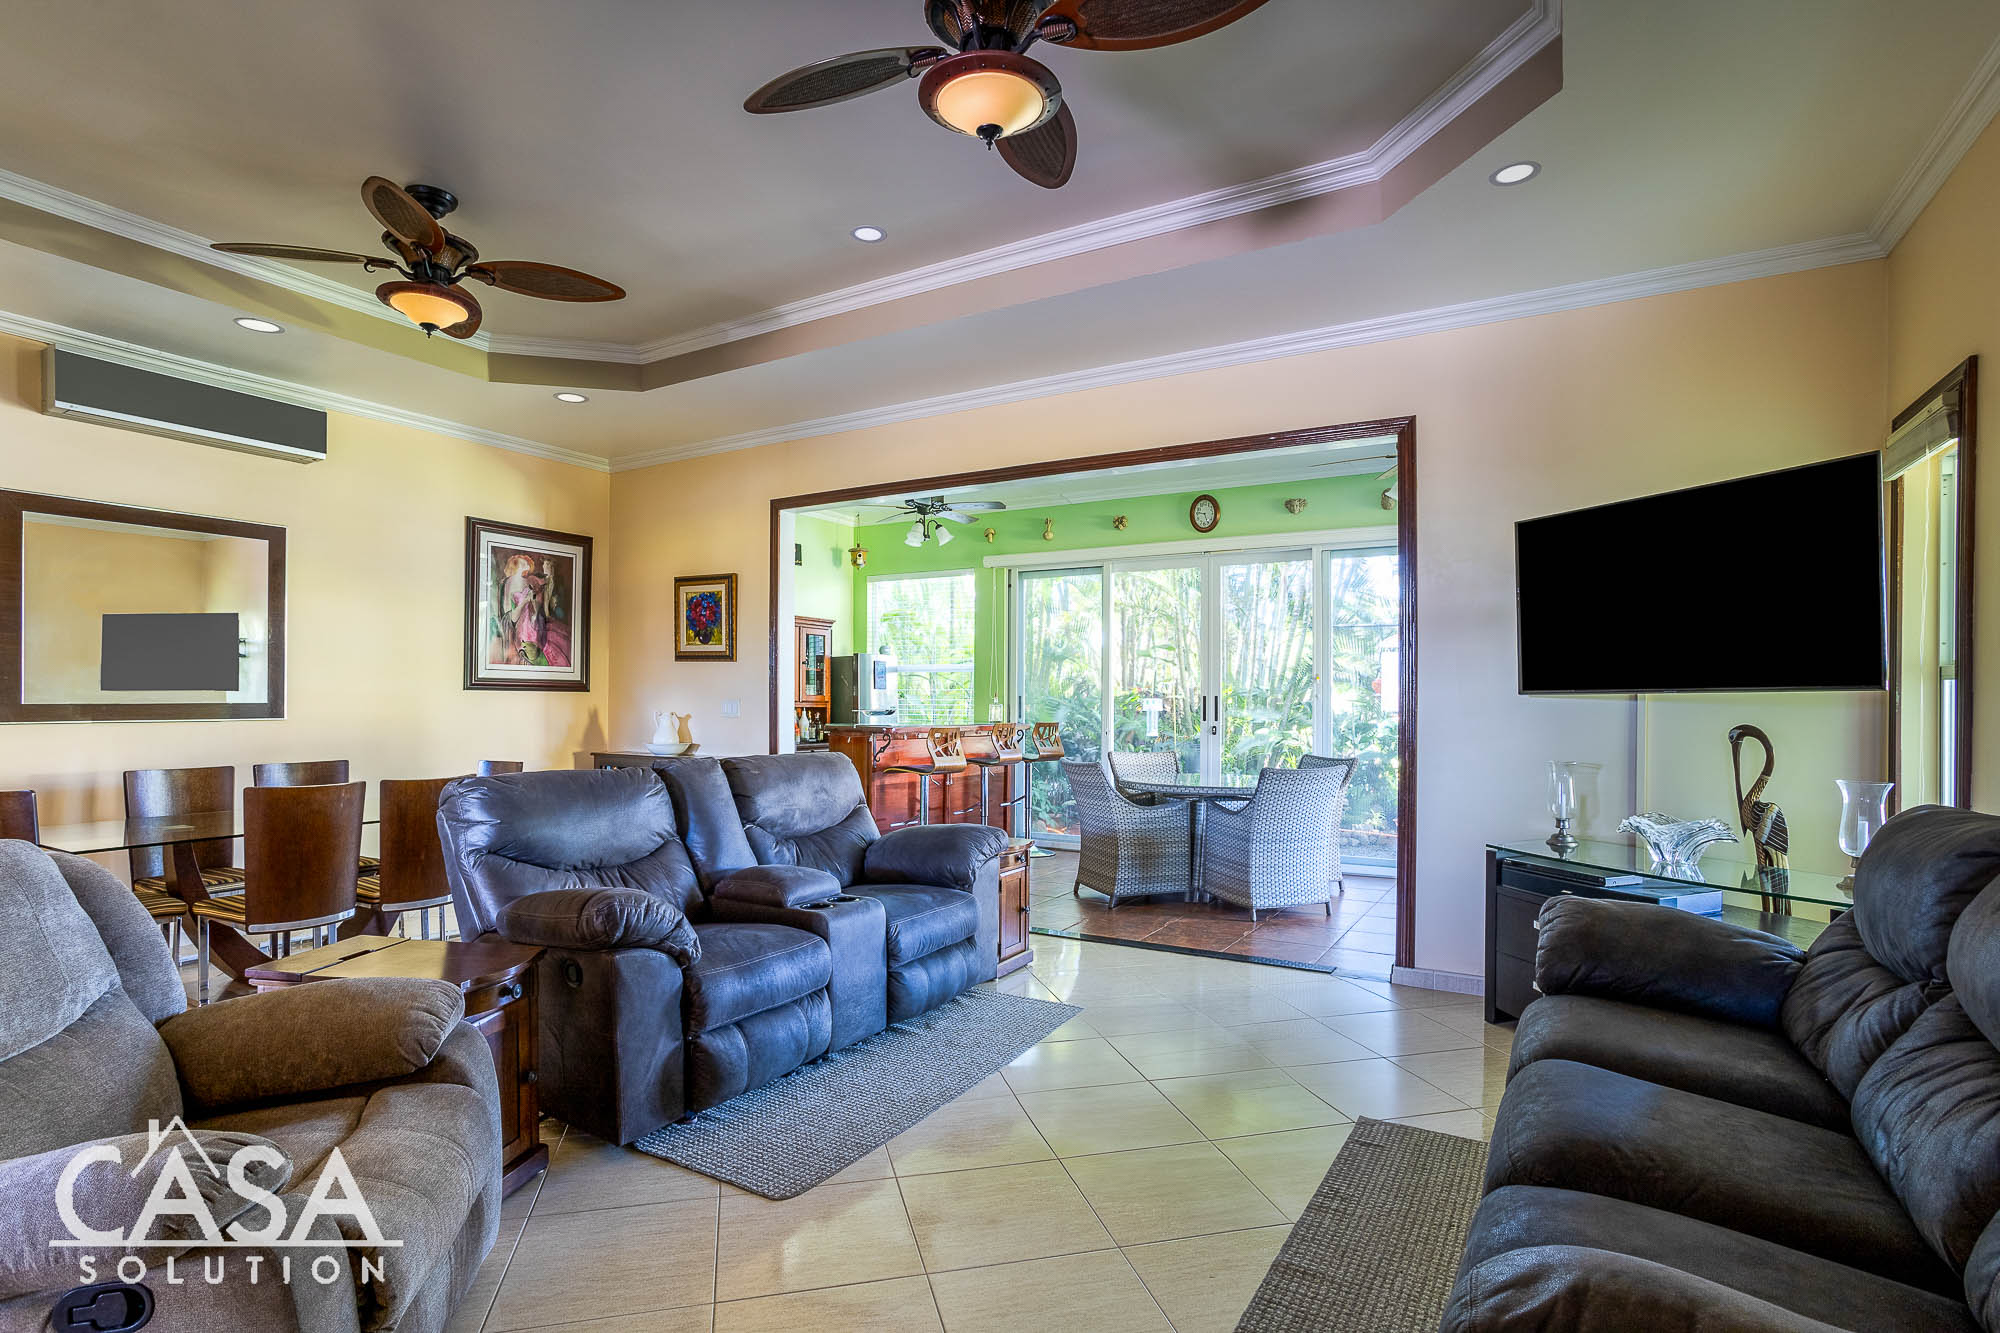 Move-in ready Home with Smart Features and Built-in Bar in Boquete Canyon Village, Alto Boquete, Chiriqui